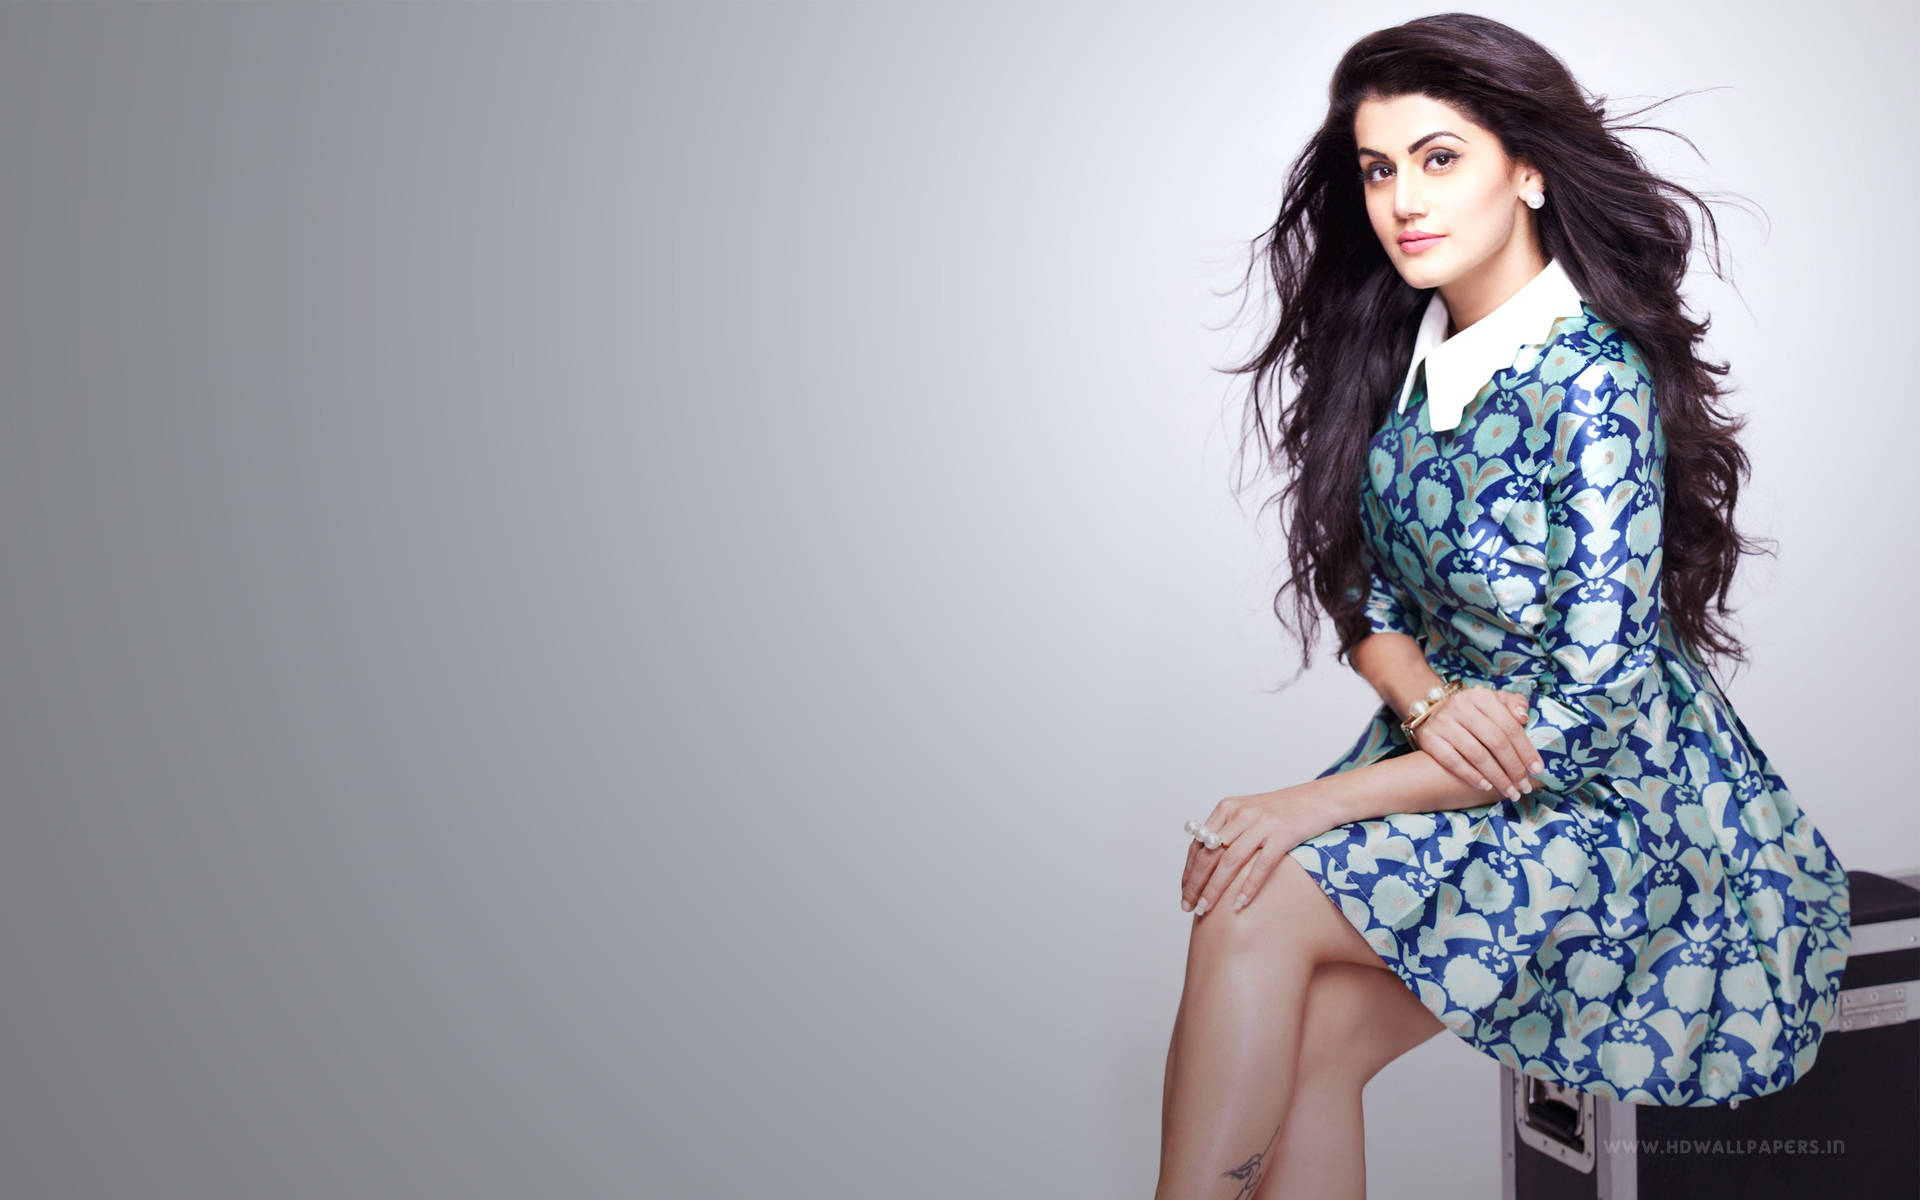 Preppytaapsee Pannu In Context Of Computer Or Mobile Wallpaper Would Be: 